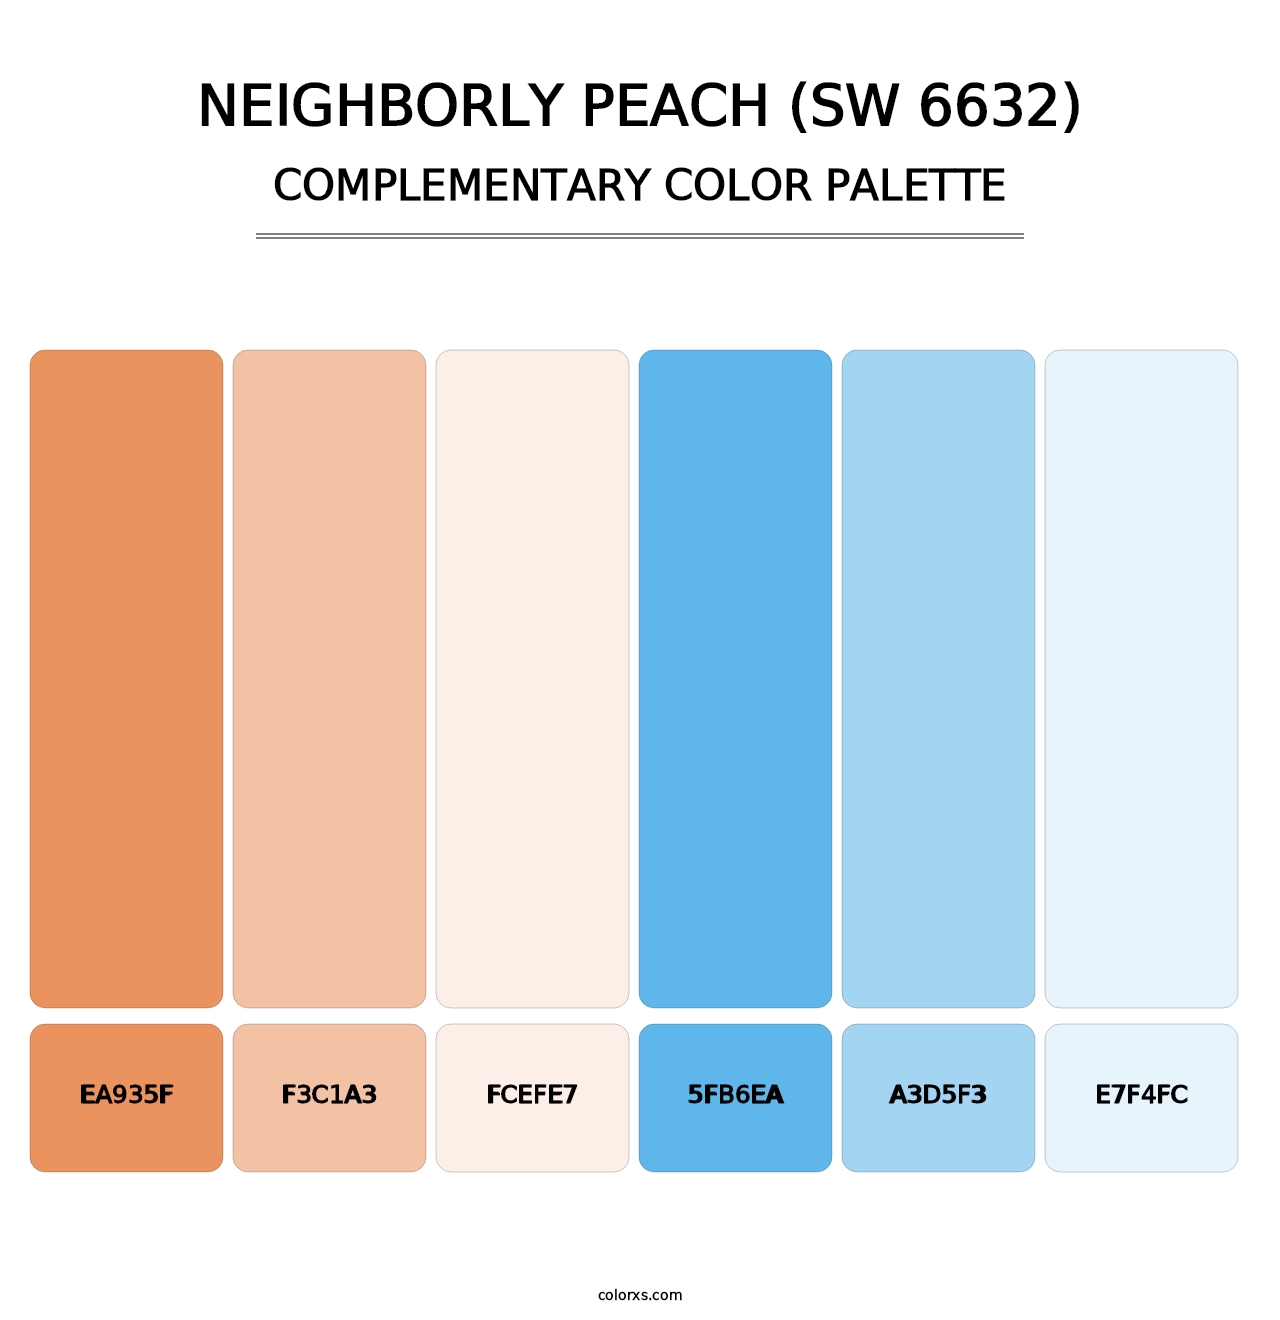 Neighborly Peach (SW 6632) - Complementary Color Palette